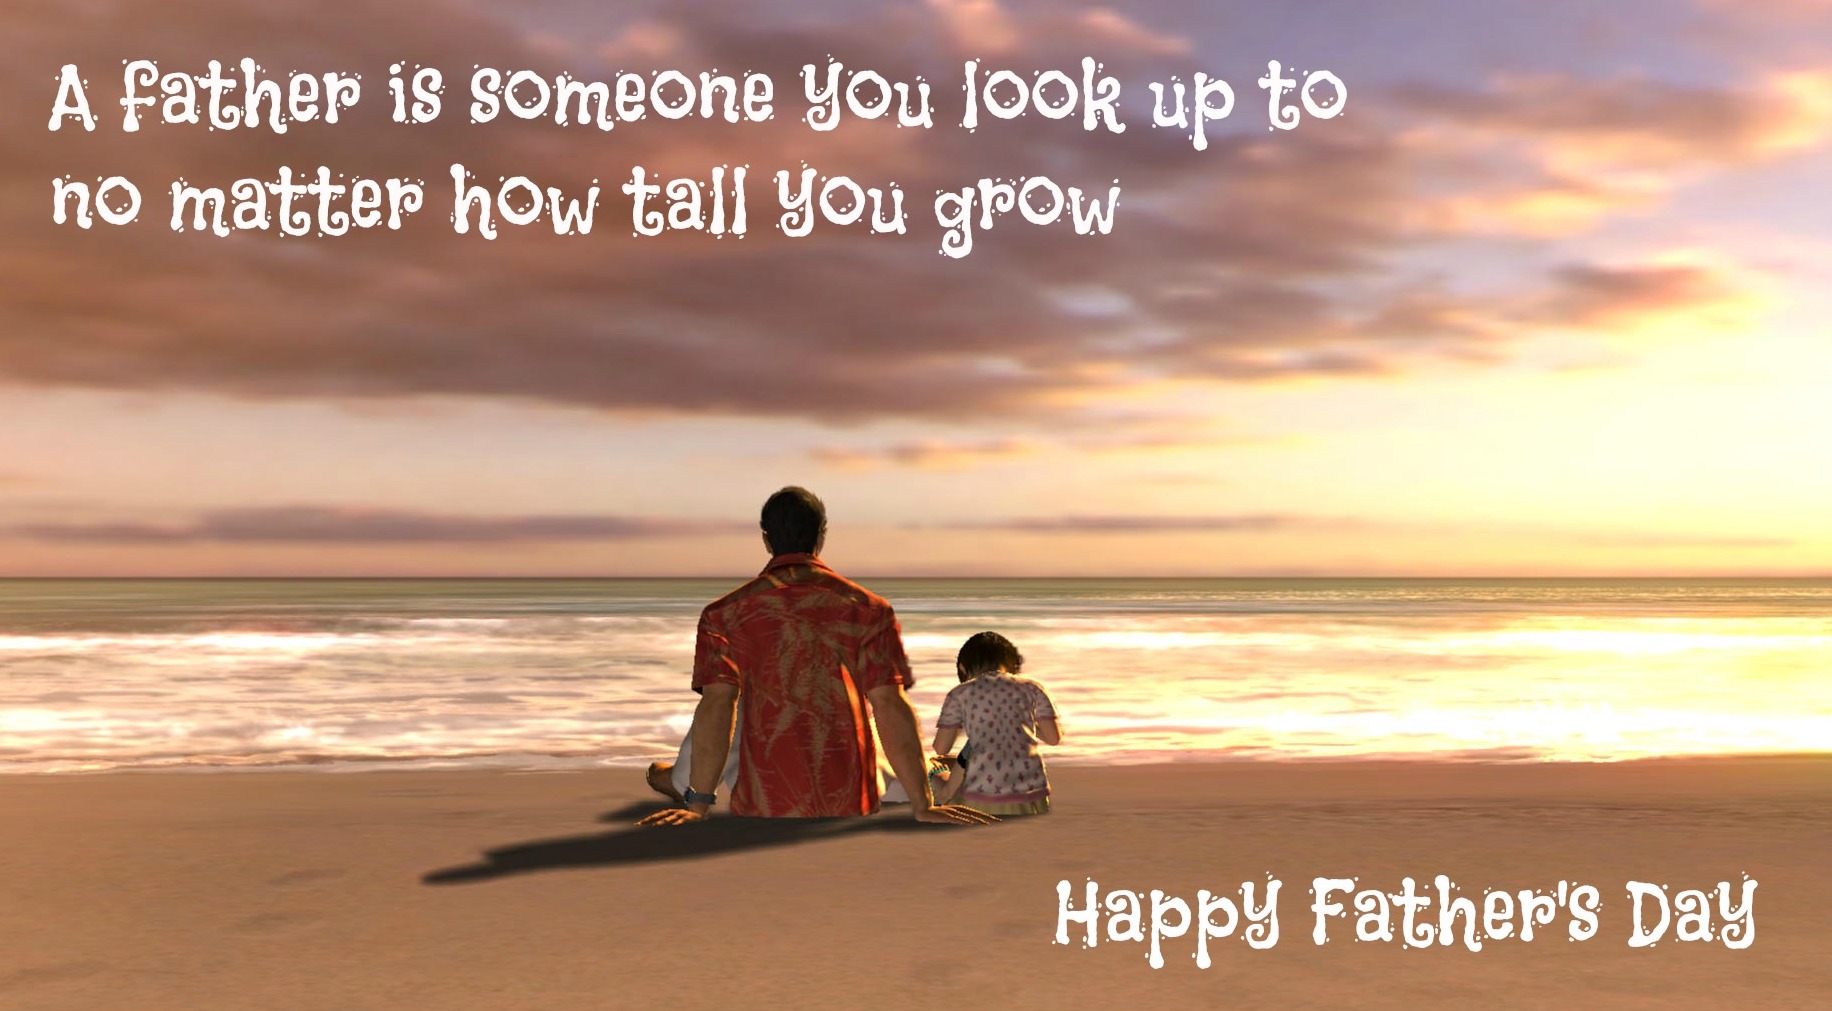 Happy Father's Day 2020: Wishes, images, beautiful quotes ...